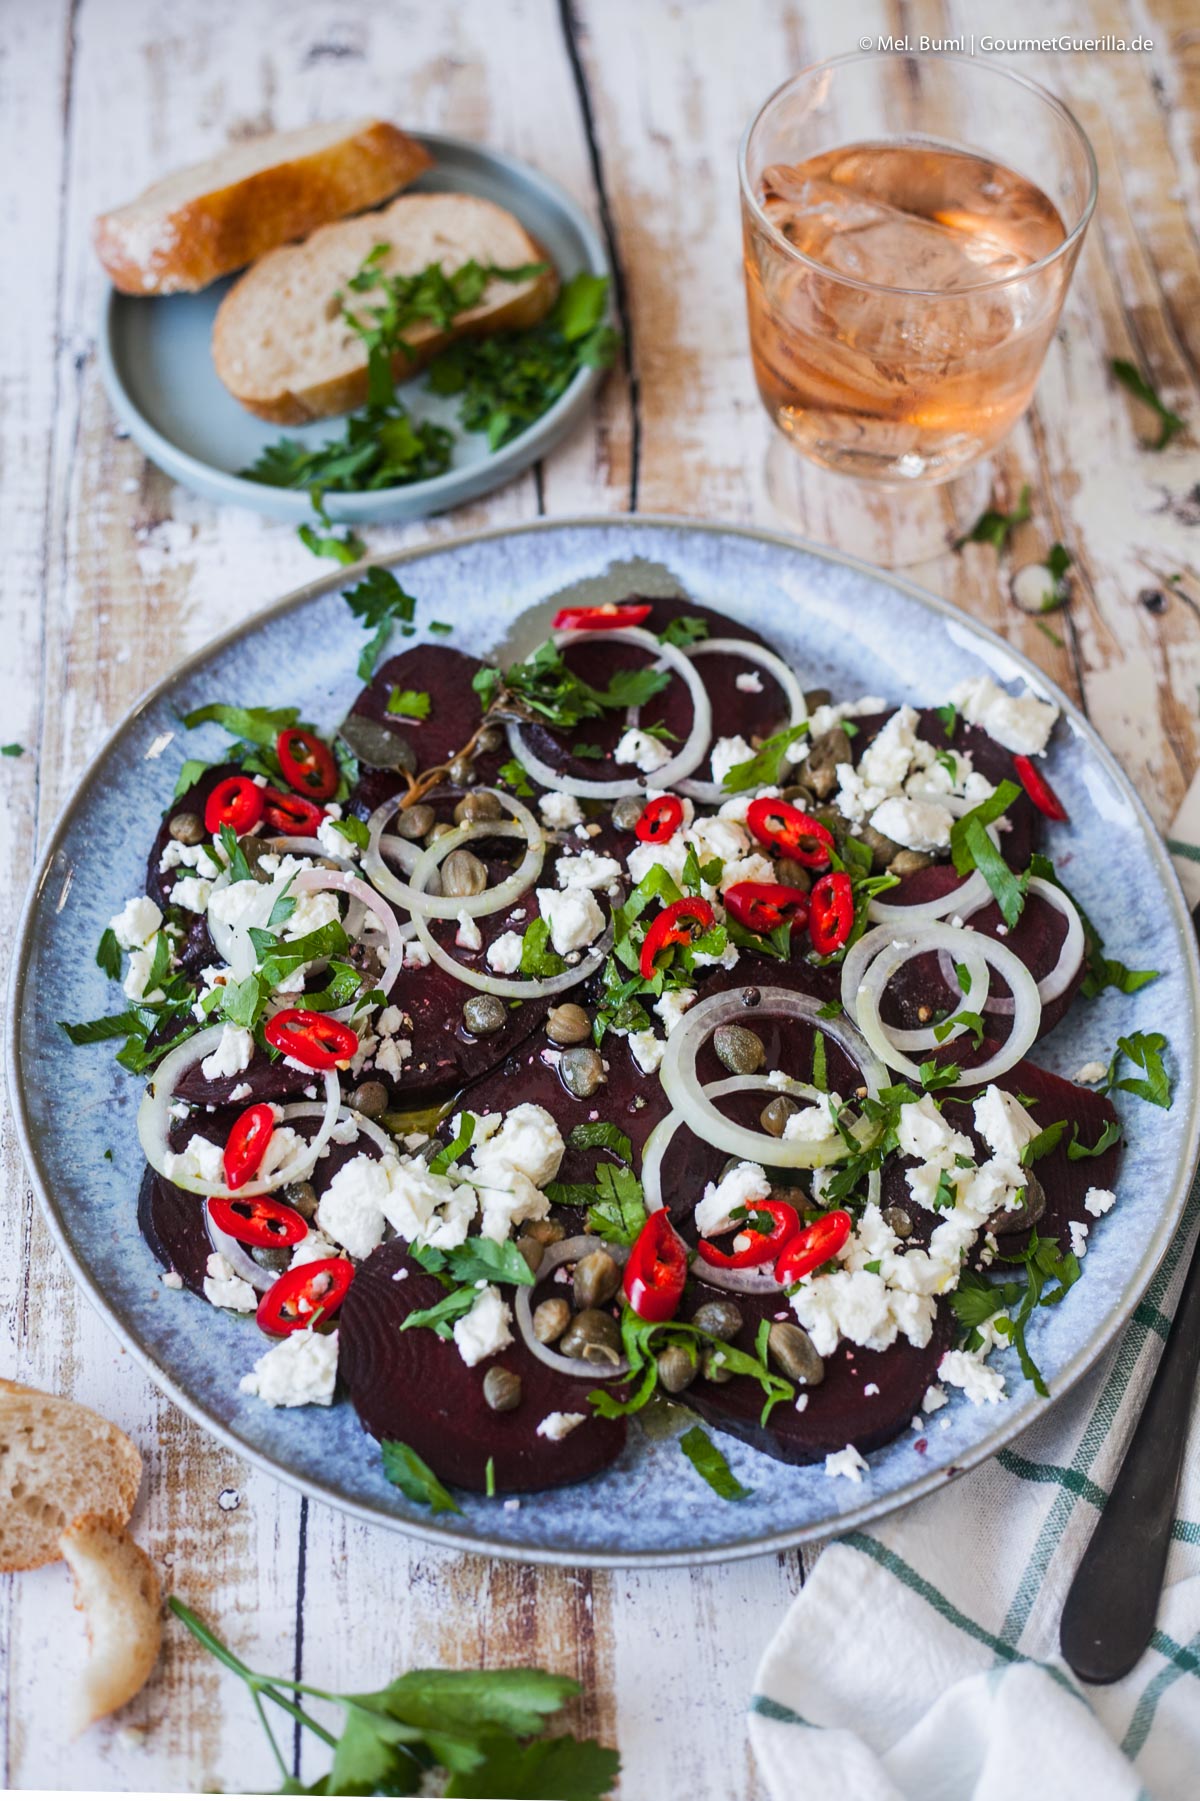  beetroot salad with capers and feta cheese - in 5 minutes on the table | GourmetGuerilla.com 